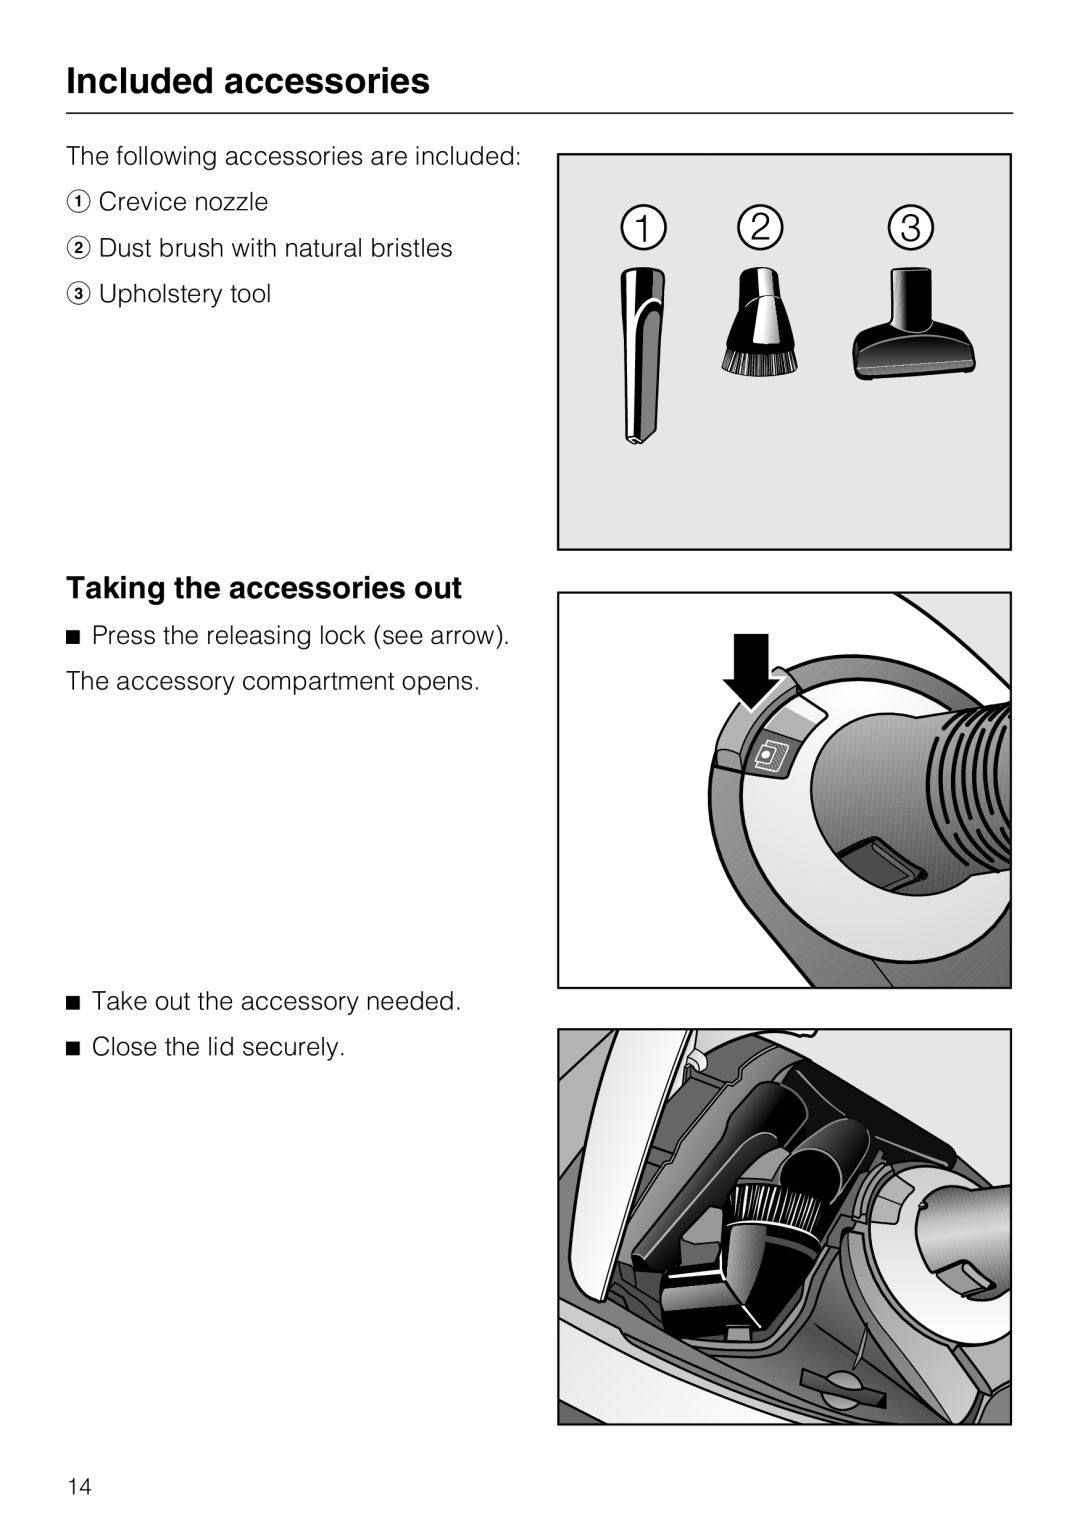 Miele S 5981 manual Included accessories, Taking the accessories out 